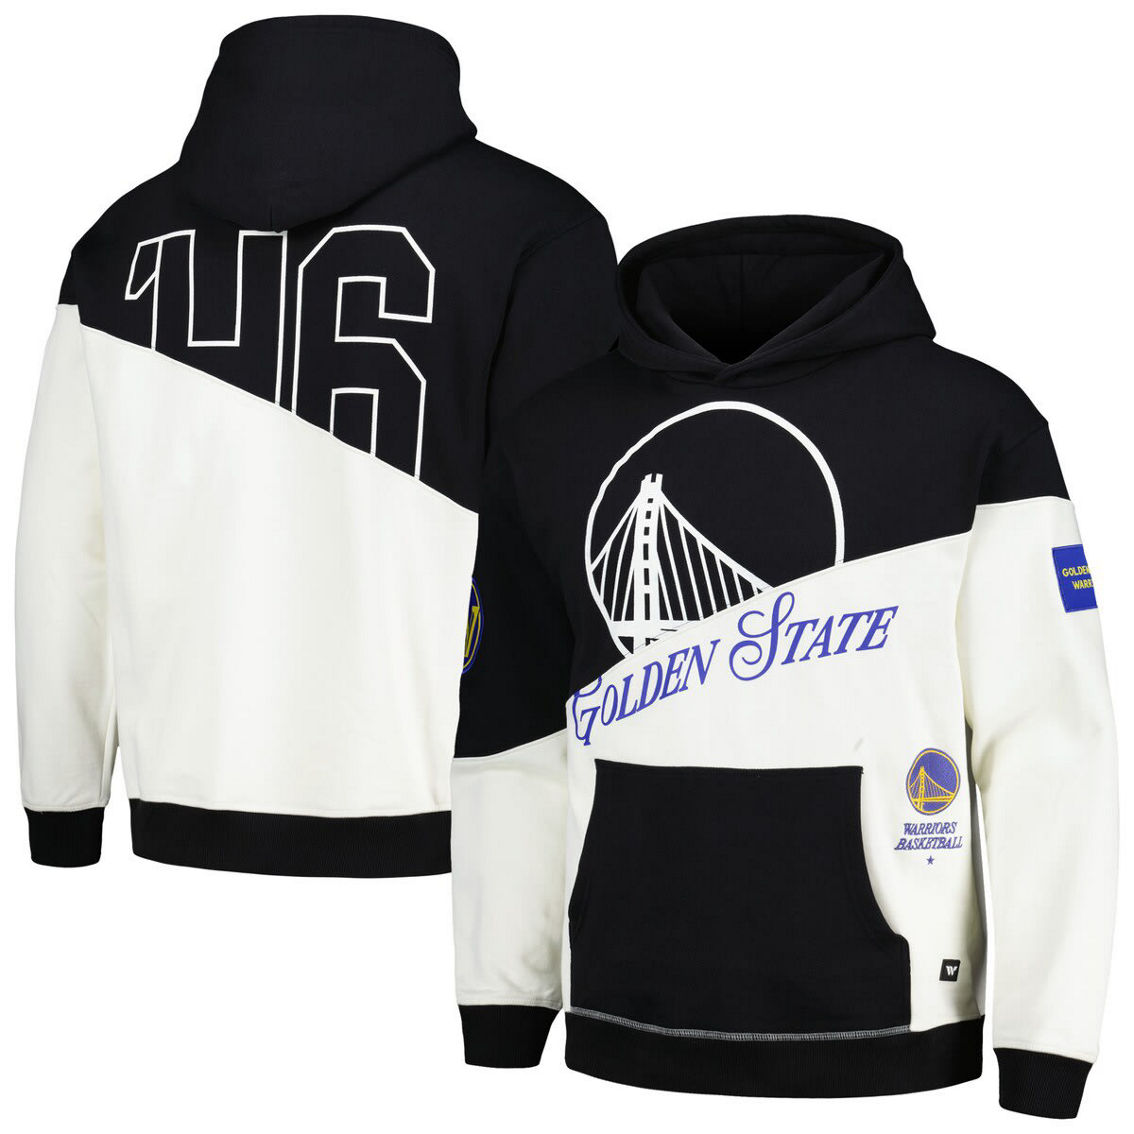 The Wild Collective Unisex Black Golden State Warriors Split Pullover Hoodie - Image 2 of 4